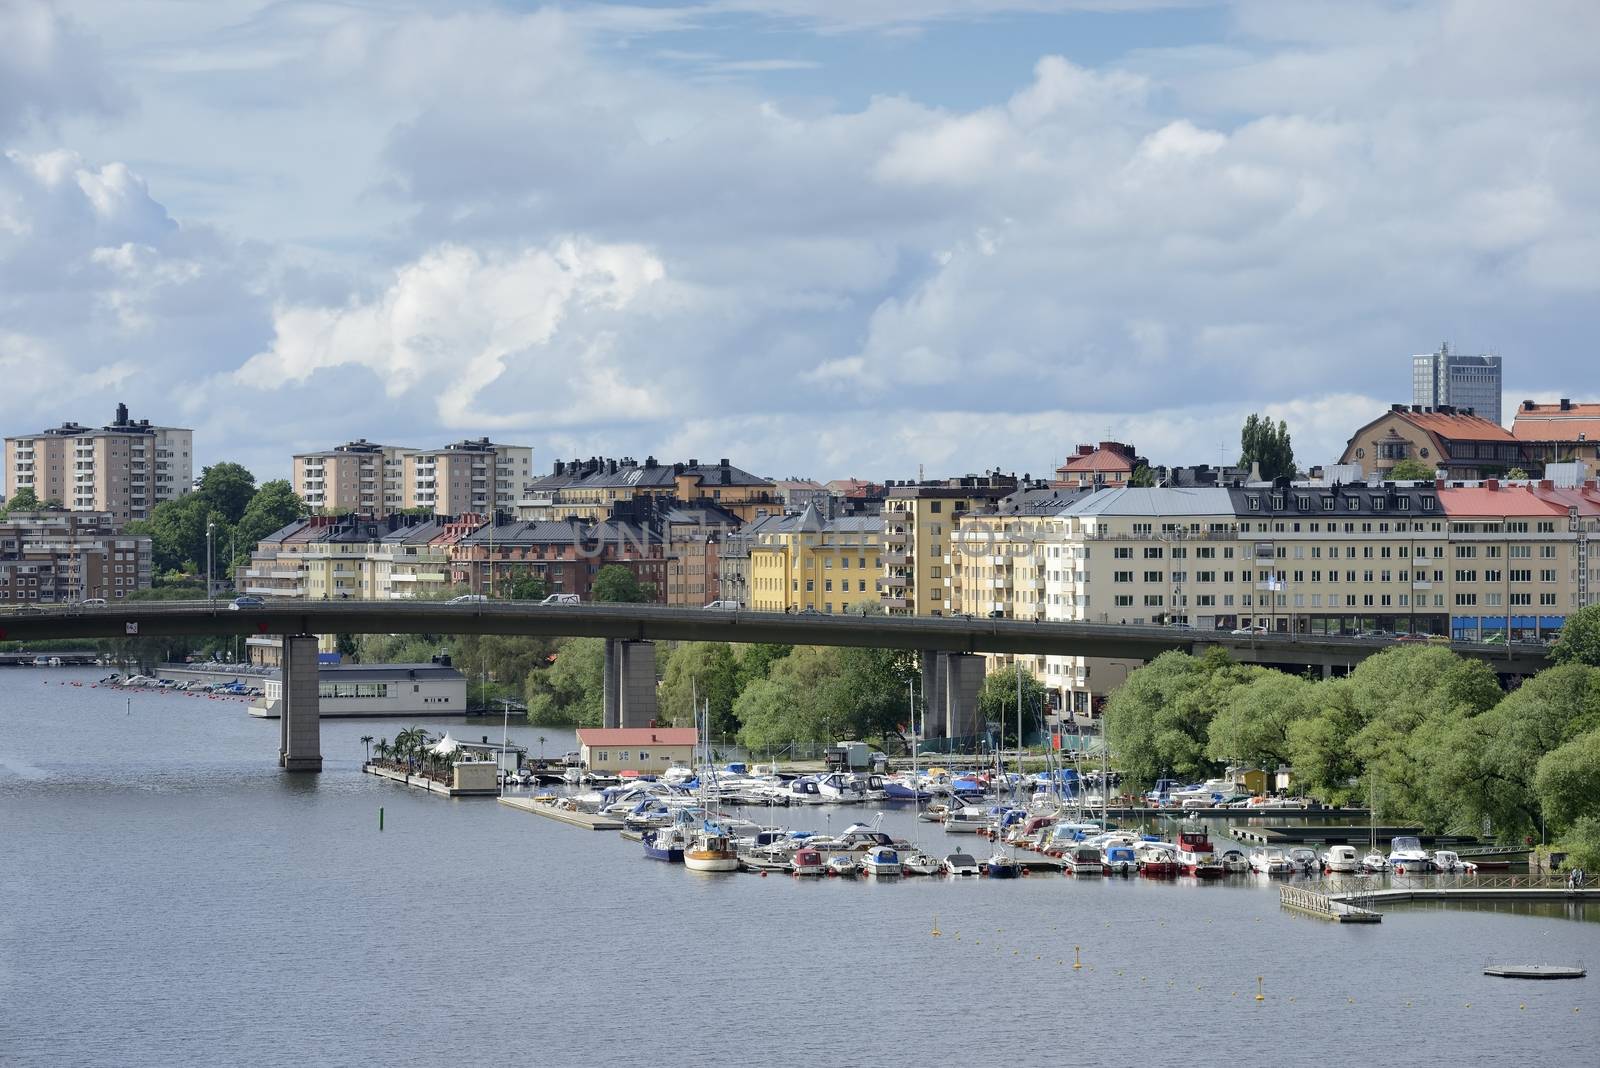 Stockholm embankment with boat.